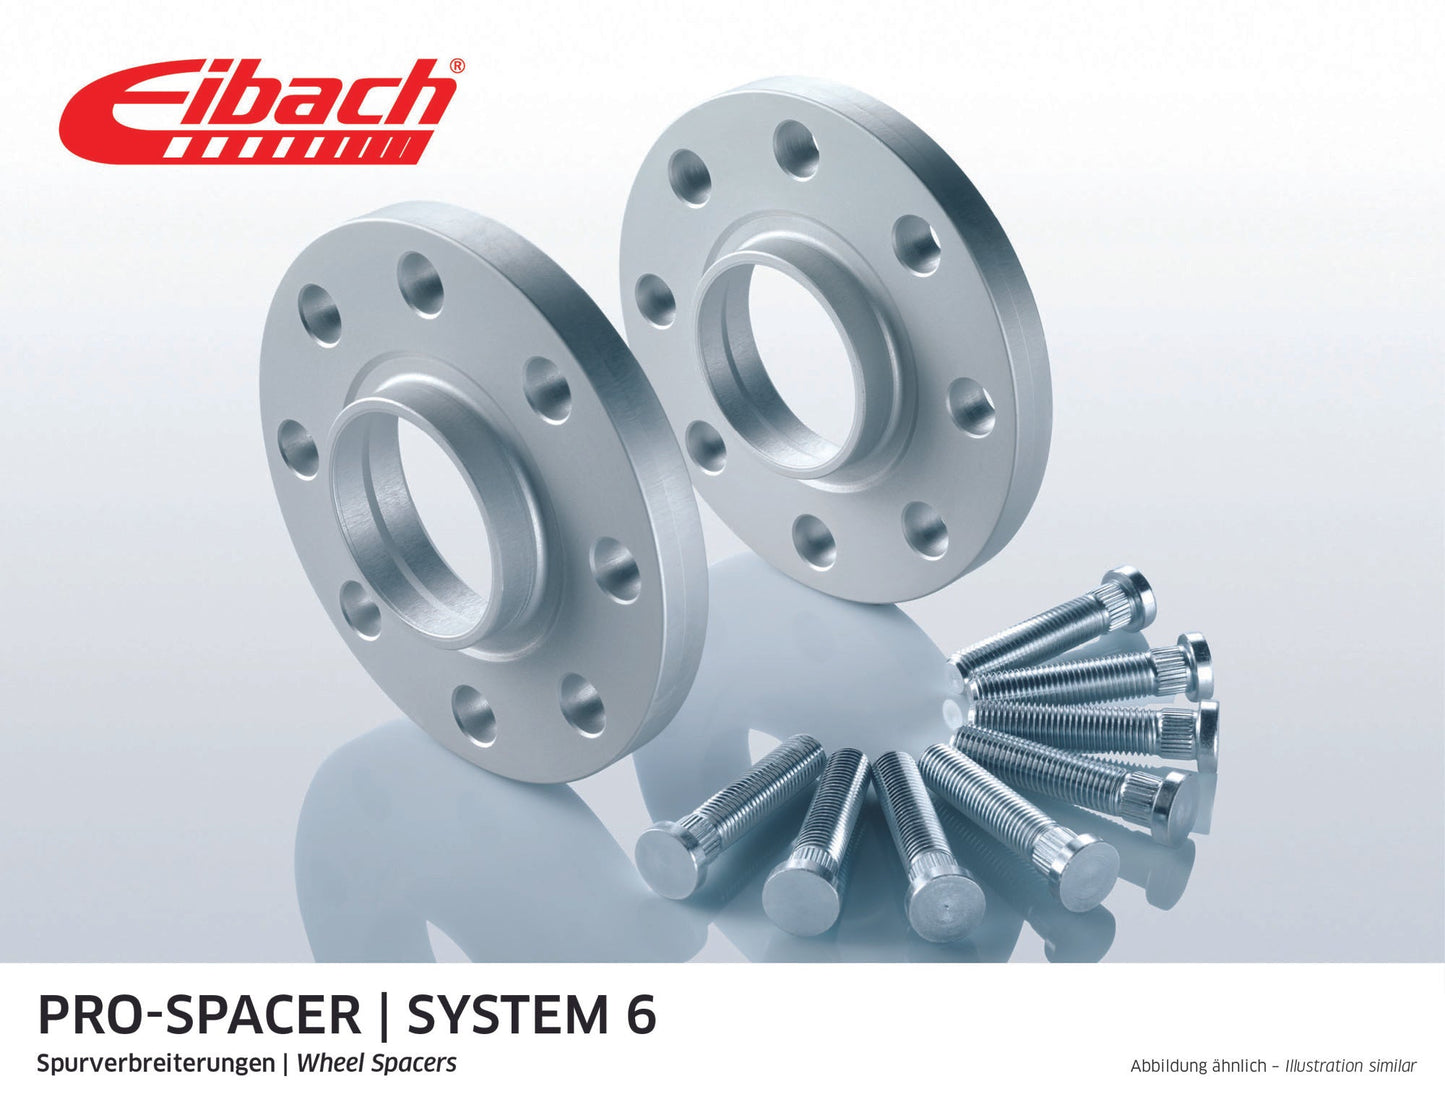 Abarth 124 Spider Eibach Pro-Spacer Kit (Pair Of Spacers) 15mm Per Spacer (System 6) S90-6-15-040